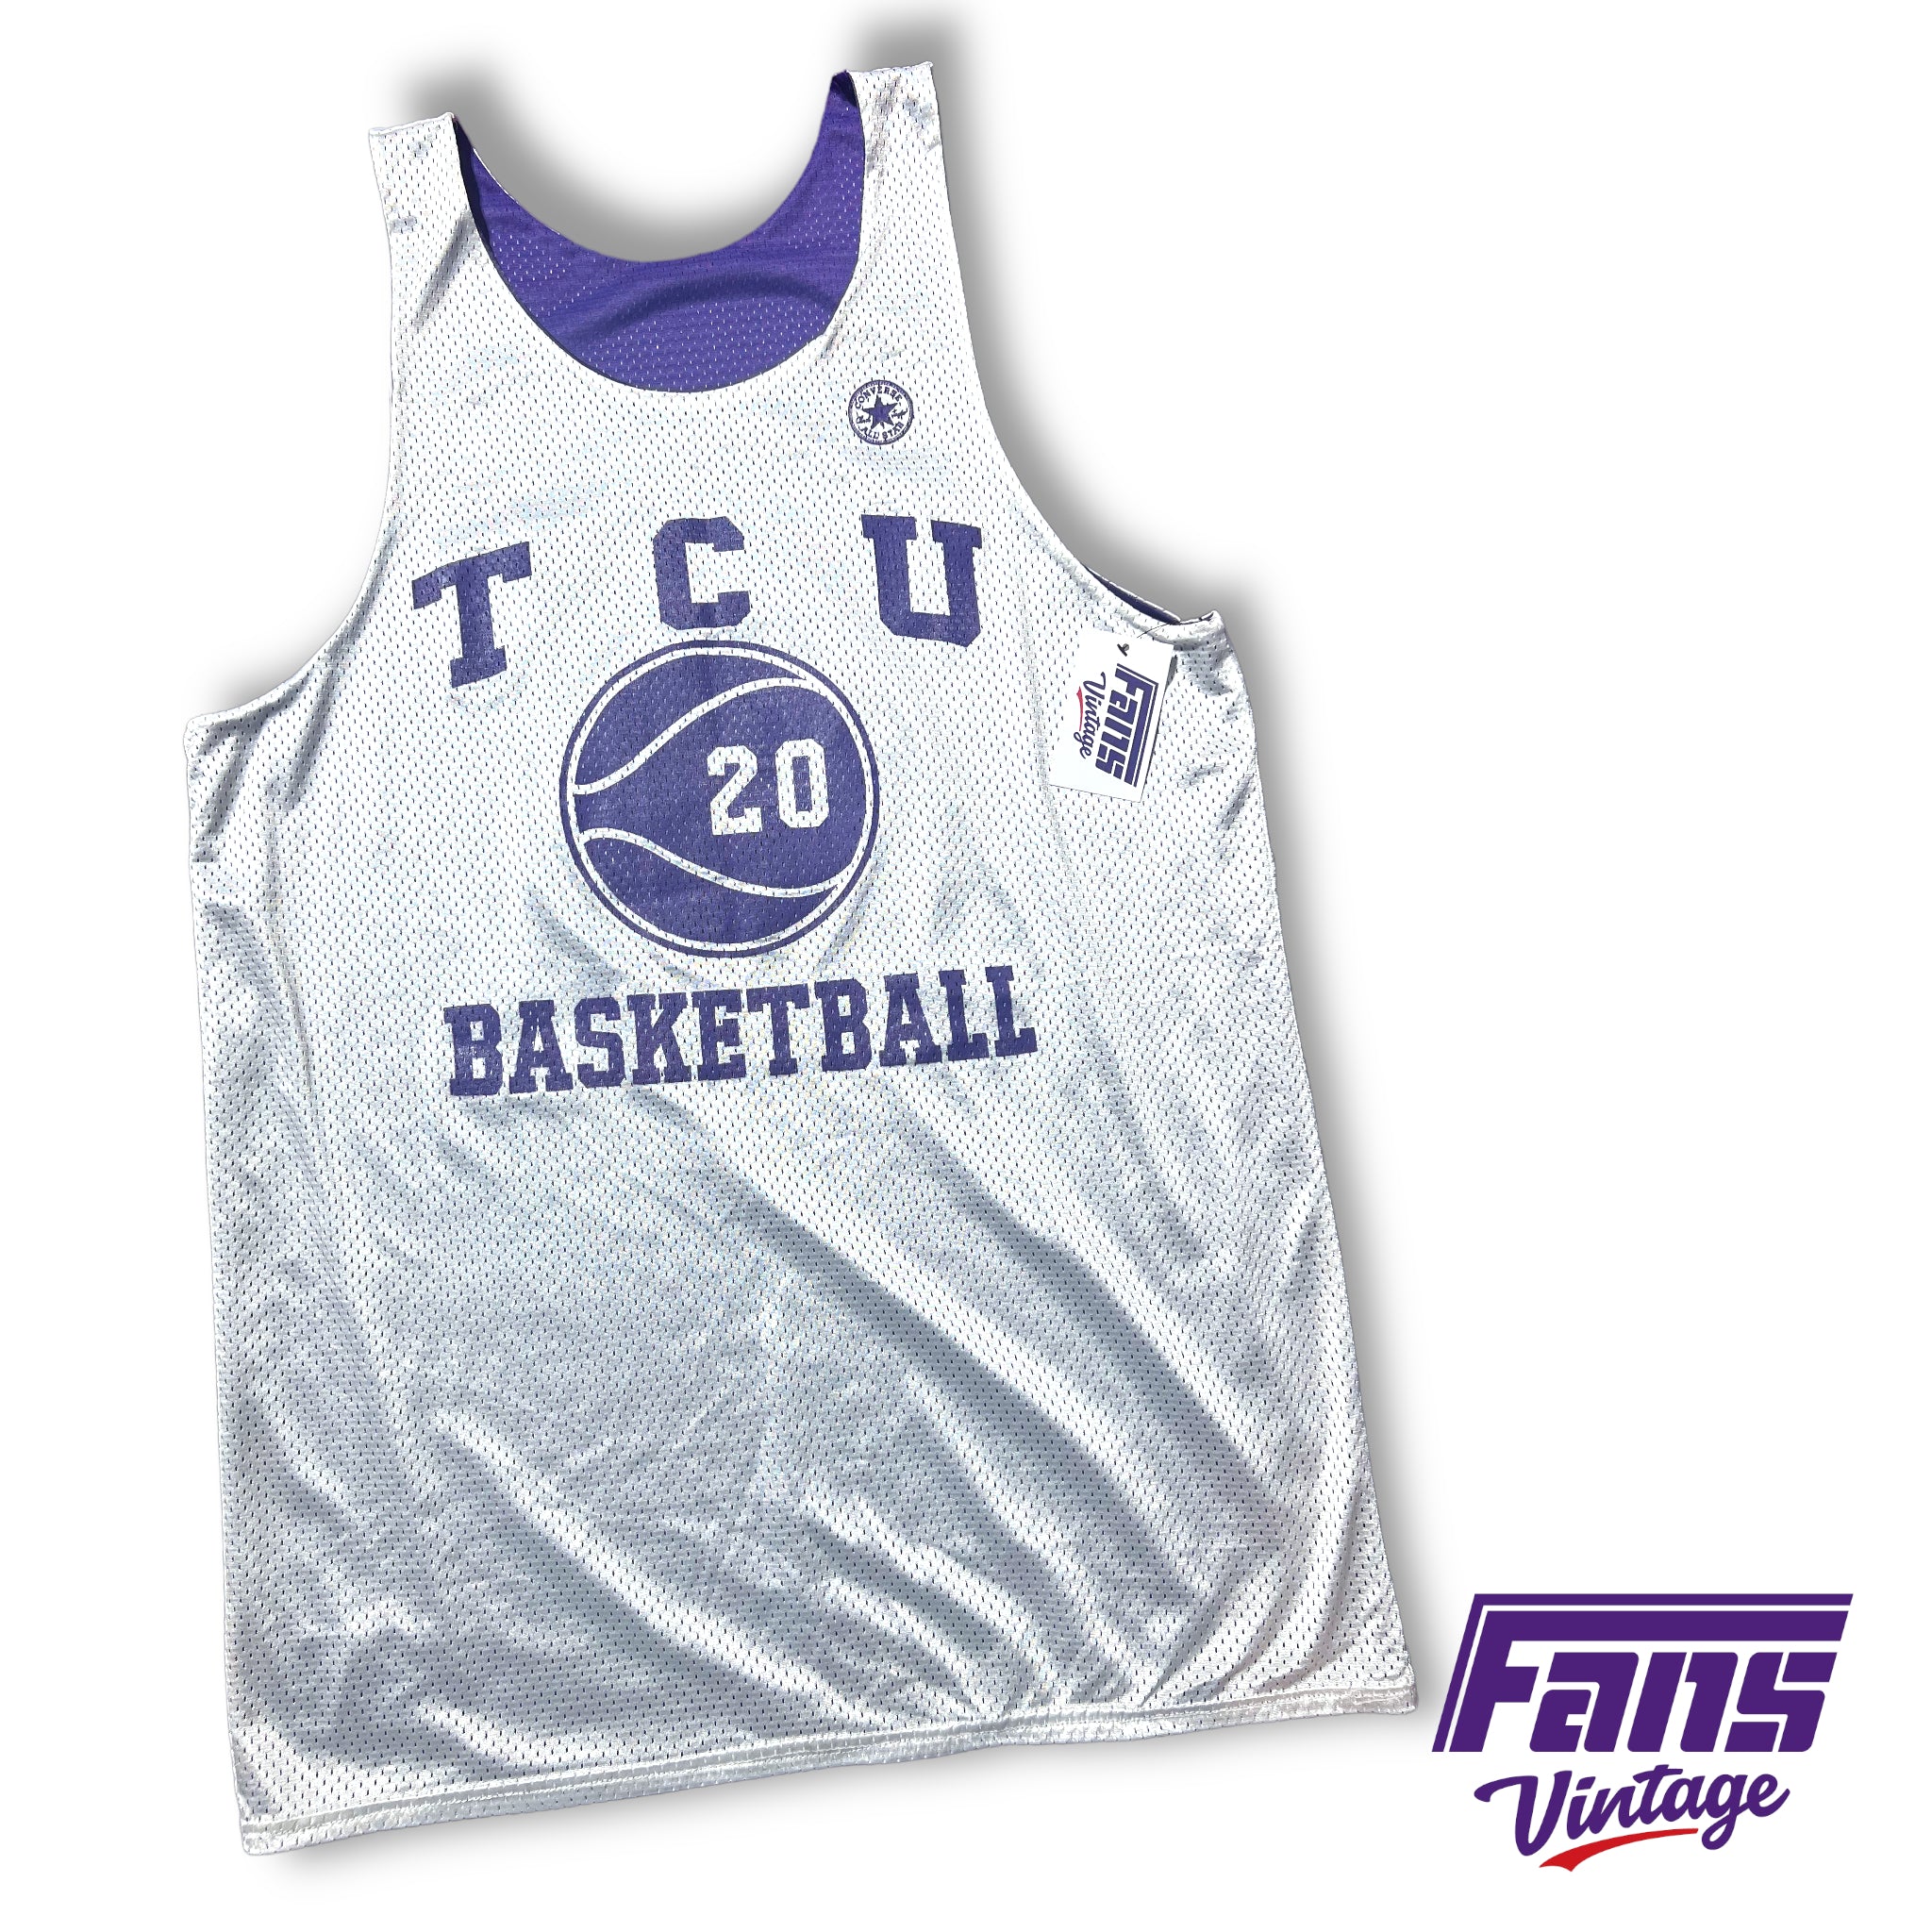 1970s Vintage TCU Basketball Jersey - Double Sided with Funny Slogan